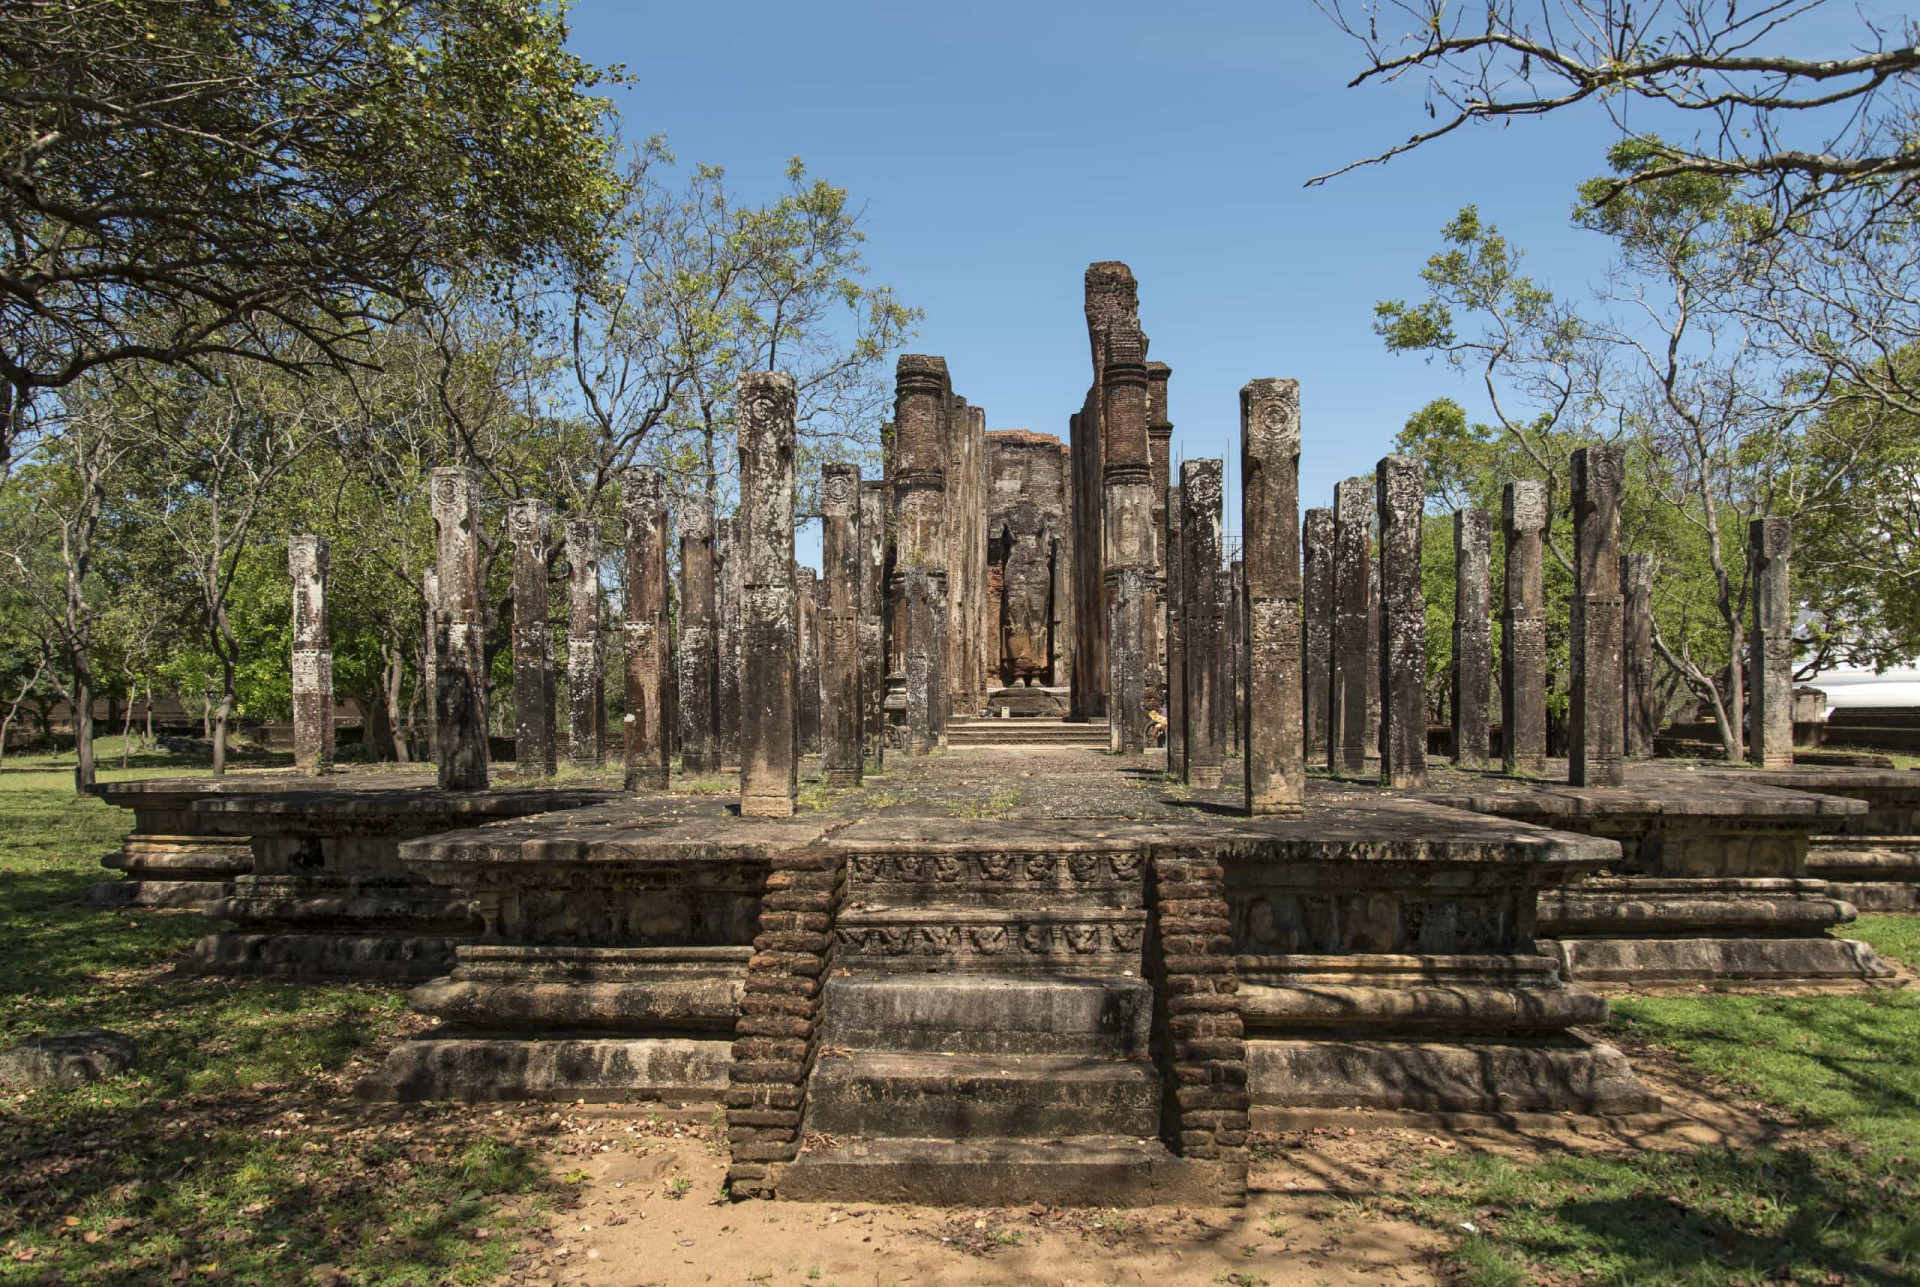 <p>The ruins of the royal ancient city of the Kingdom of Polonnaruwa include the Gal Vihara, a rock temple of the Buddha.</p><p>You may also like:<a href="https://www.starsinsider.com/n/171247?utm_source=msn.com&utm_medium=display&utm_campaign=referral_description&utm_content=273472v10en-us"> Exotic British destinations you must visit! </a></p>